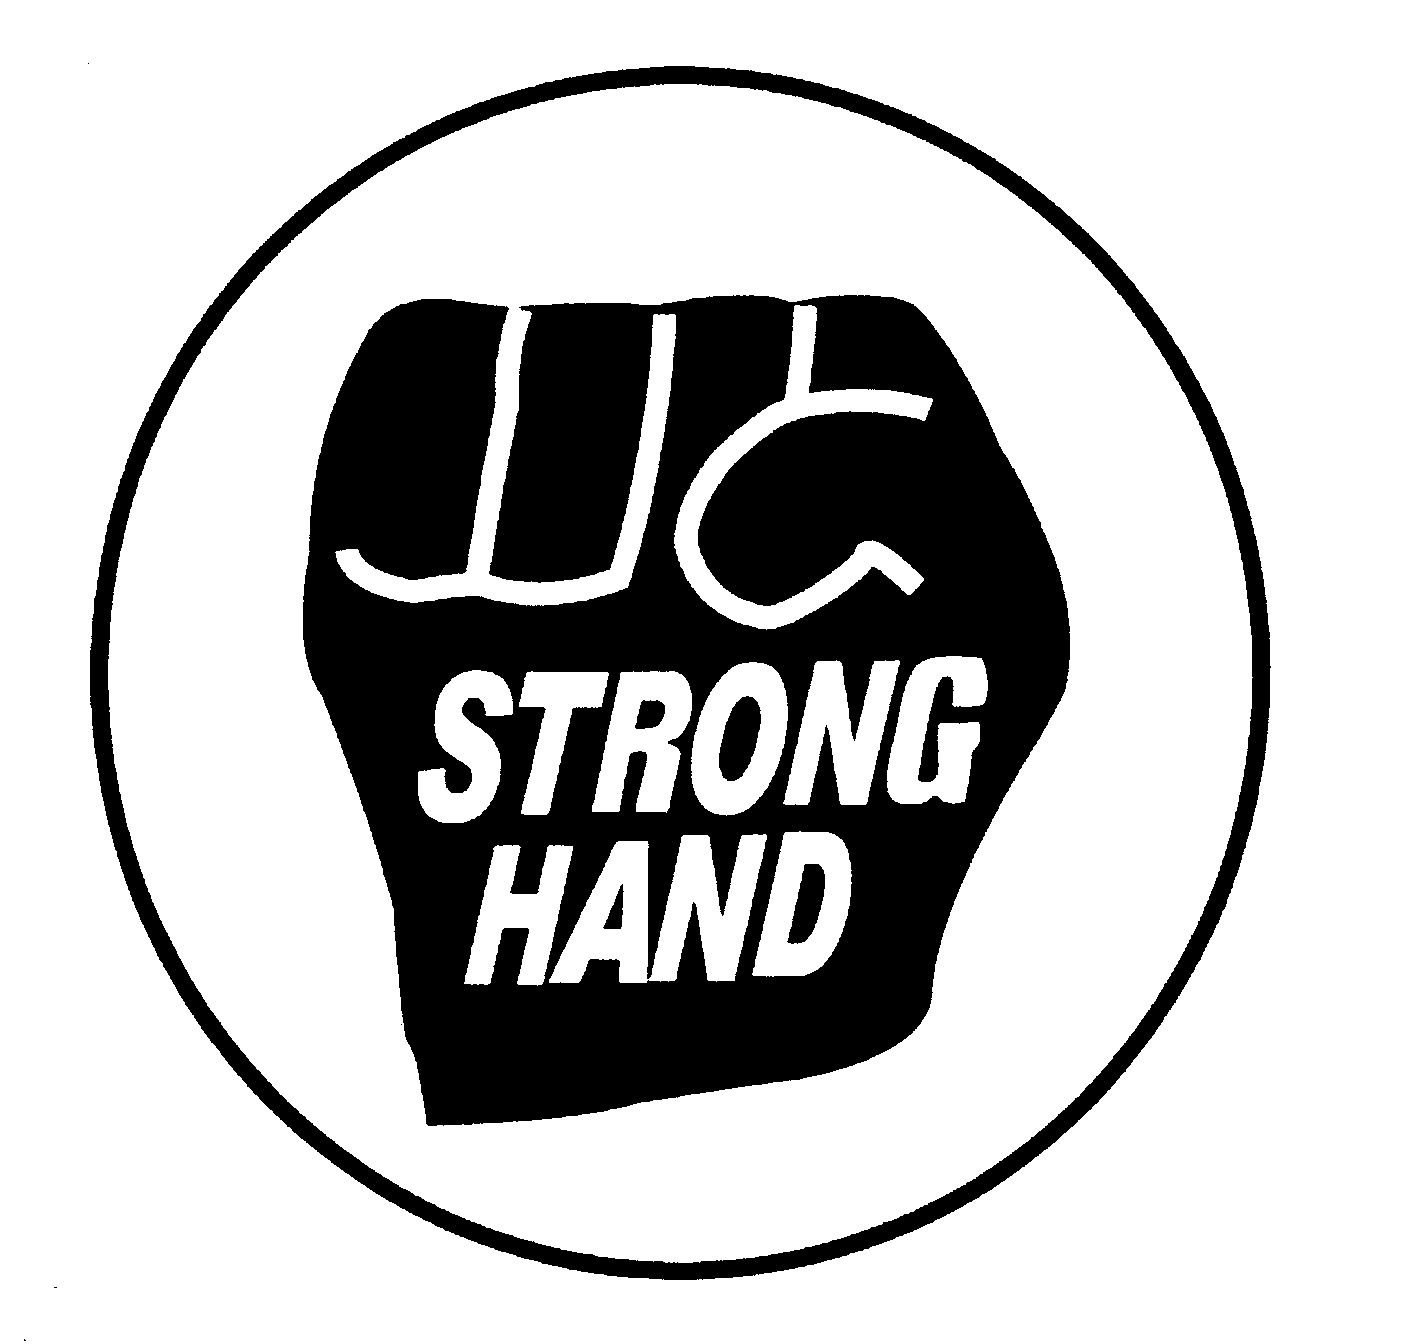  STRONG HAND